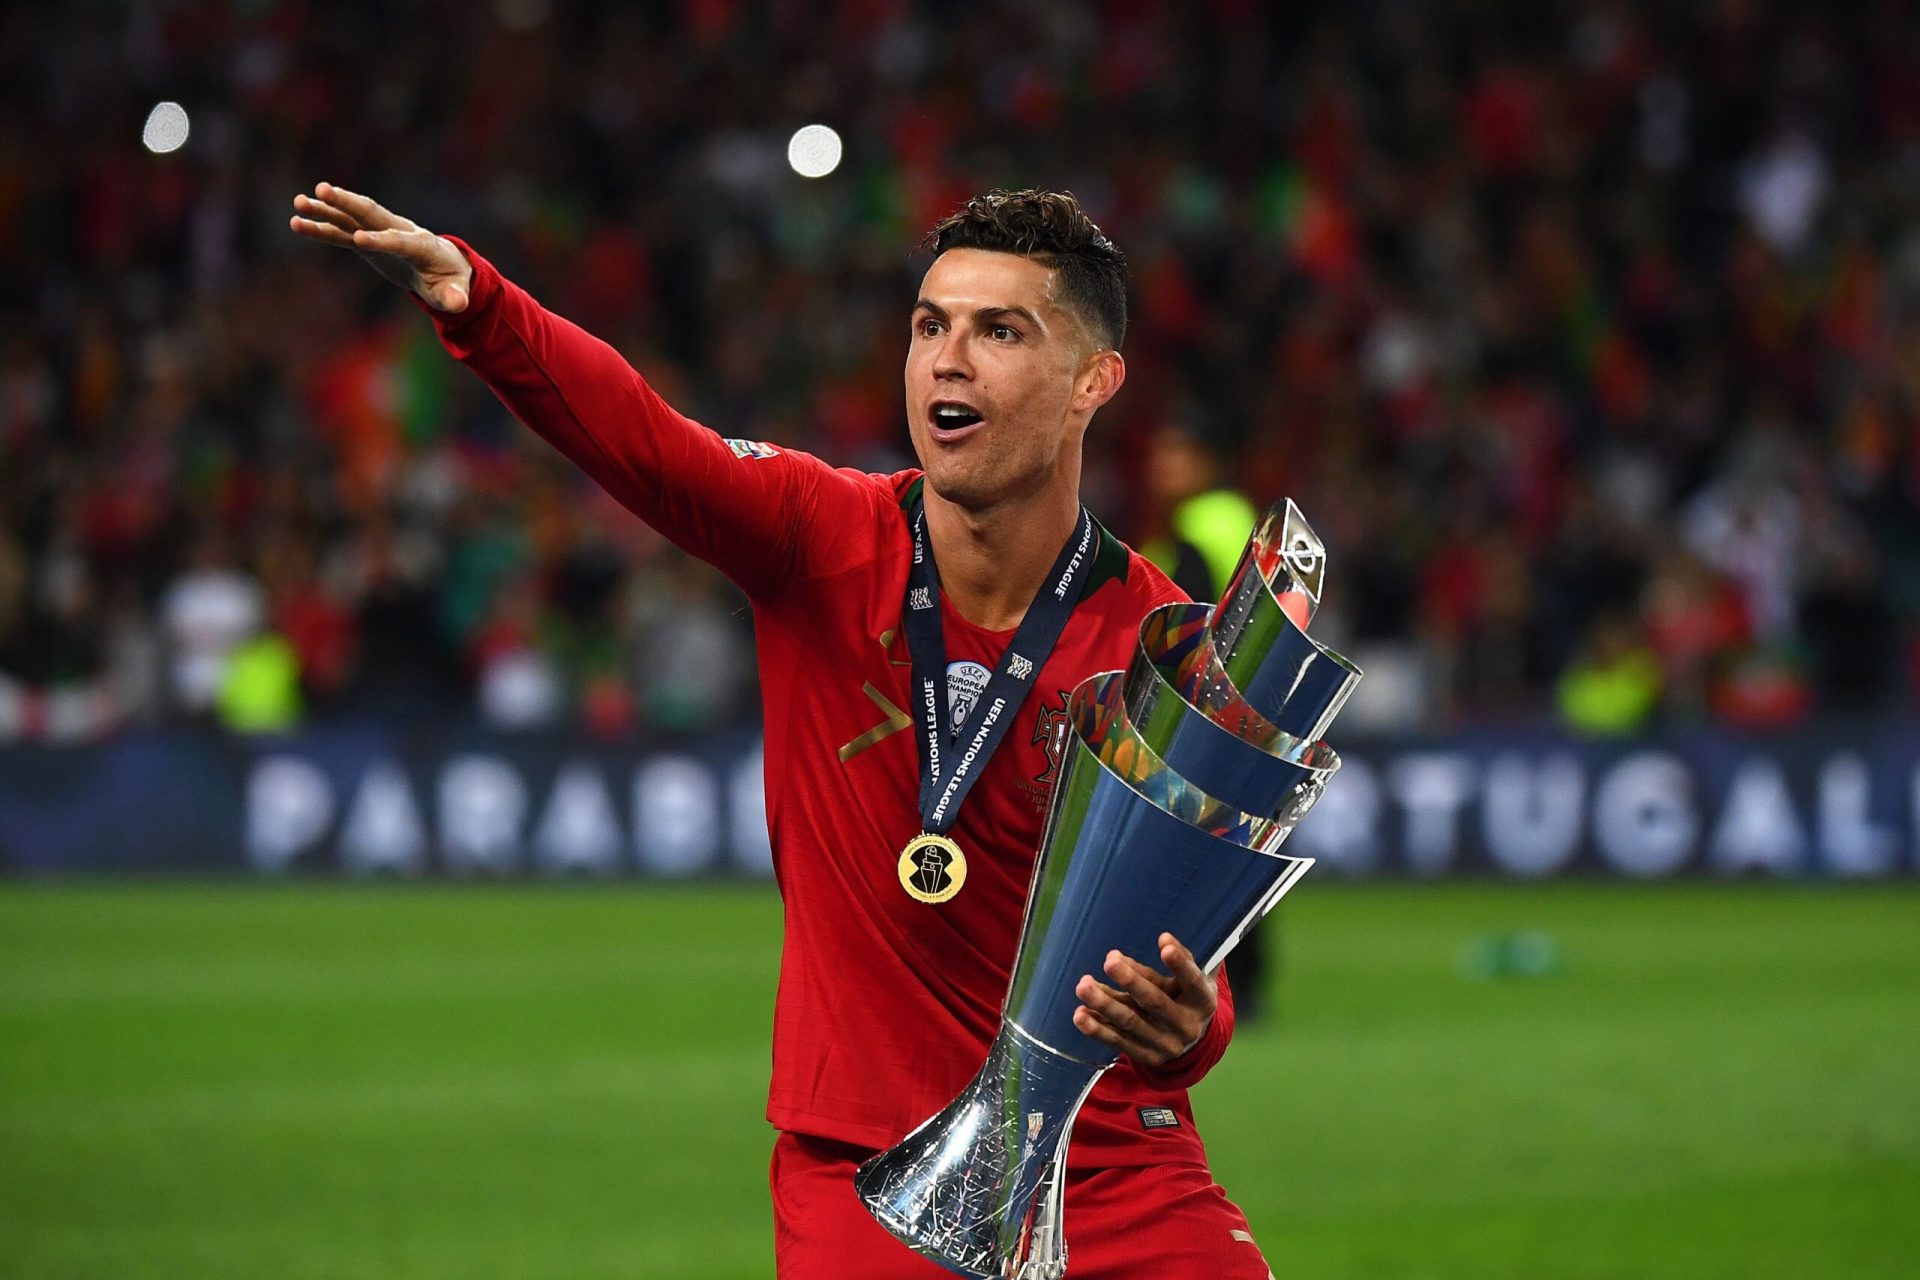 Cristiano Ronaldo Dreams Of World Cup Glory With Portugal